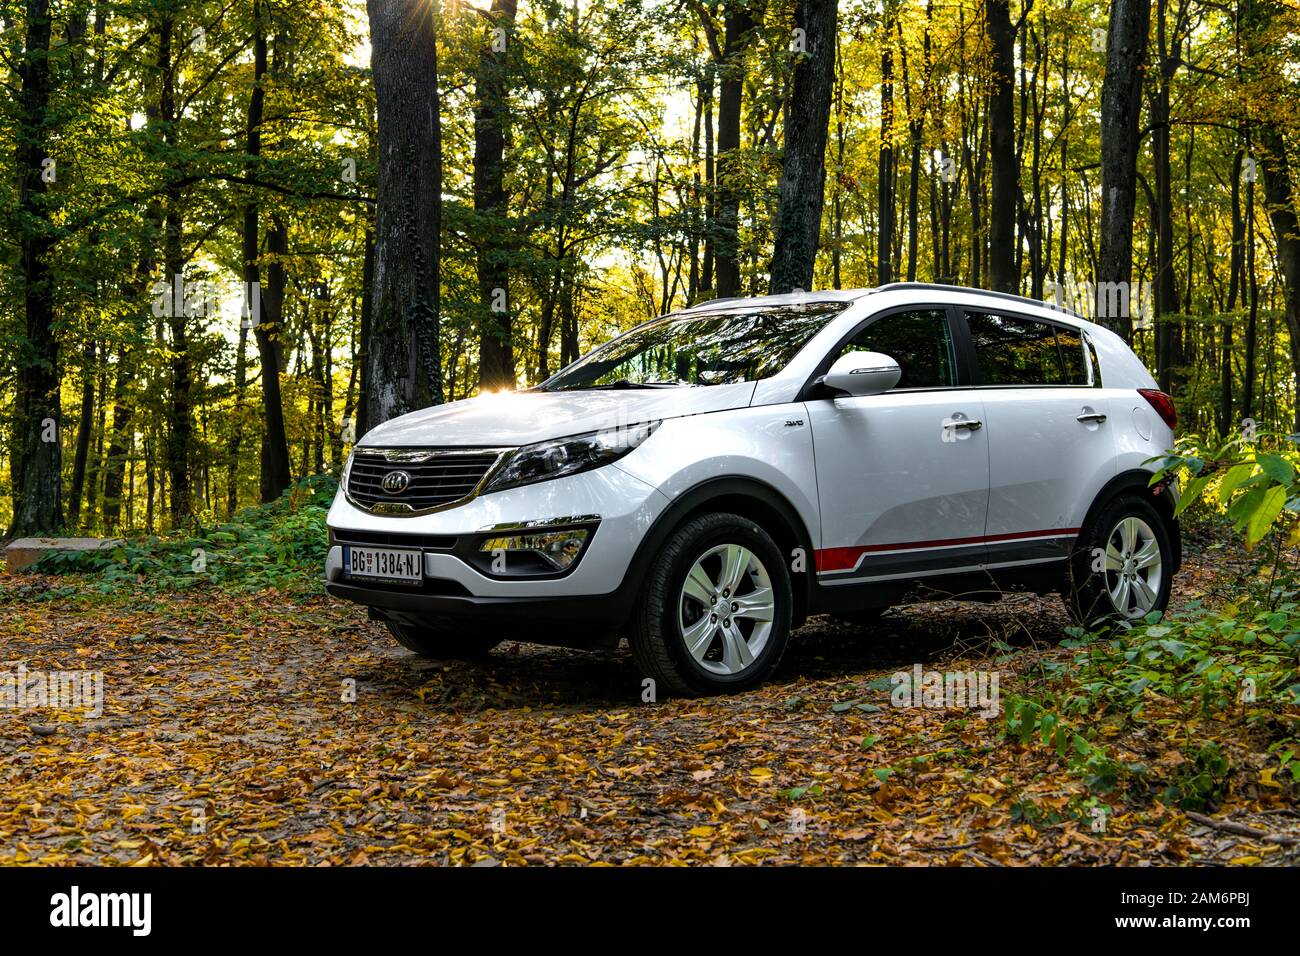 SUV car Kia Sportage 2.0 CRDI awd or 4x4, on the forest road, coverd with  dried leaves, beautiful car landscape, with dominant autumn colors Stock  Photo - Alamy